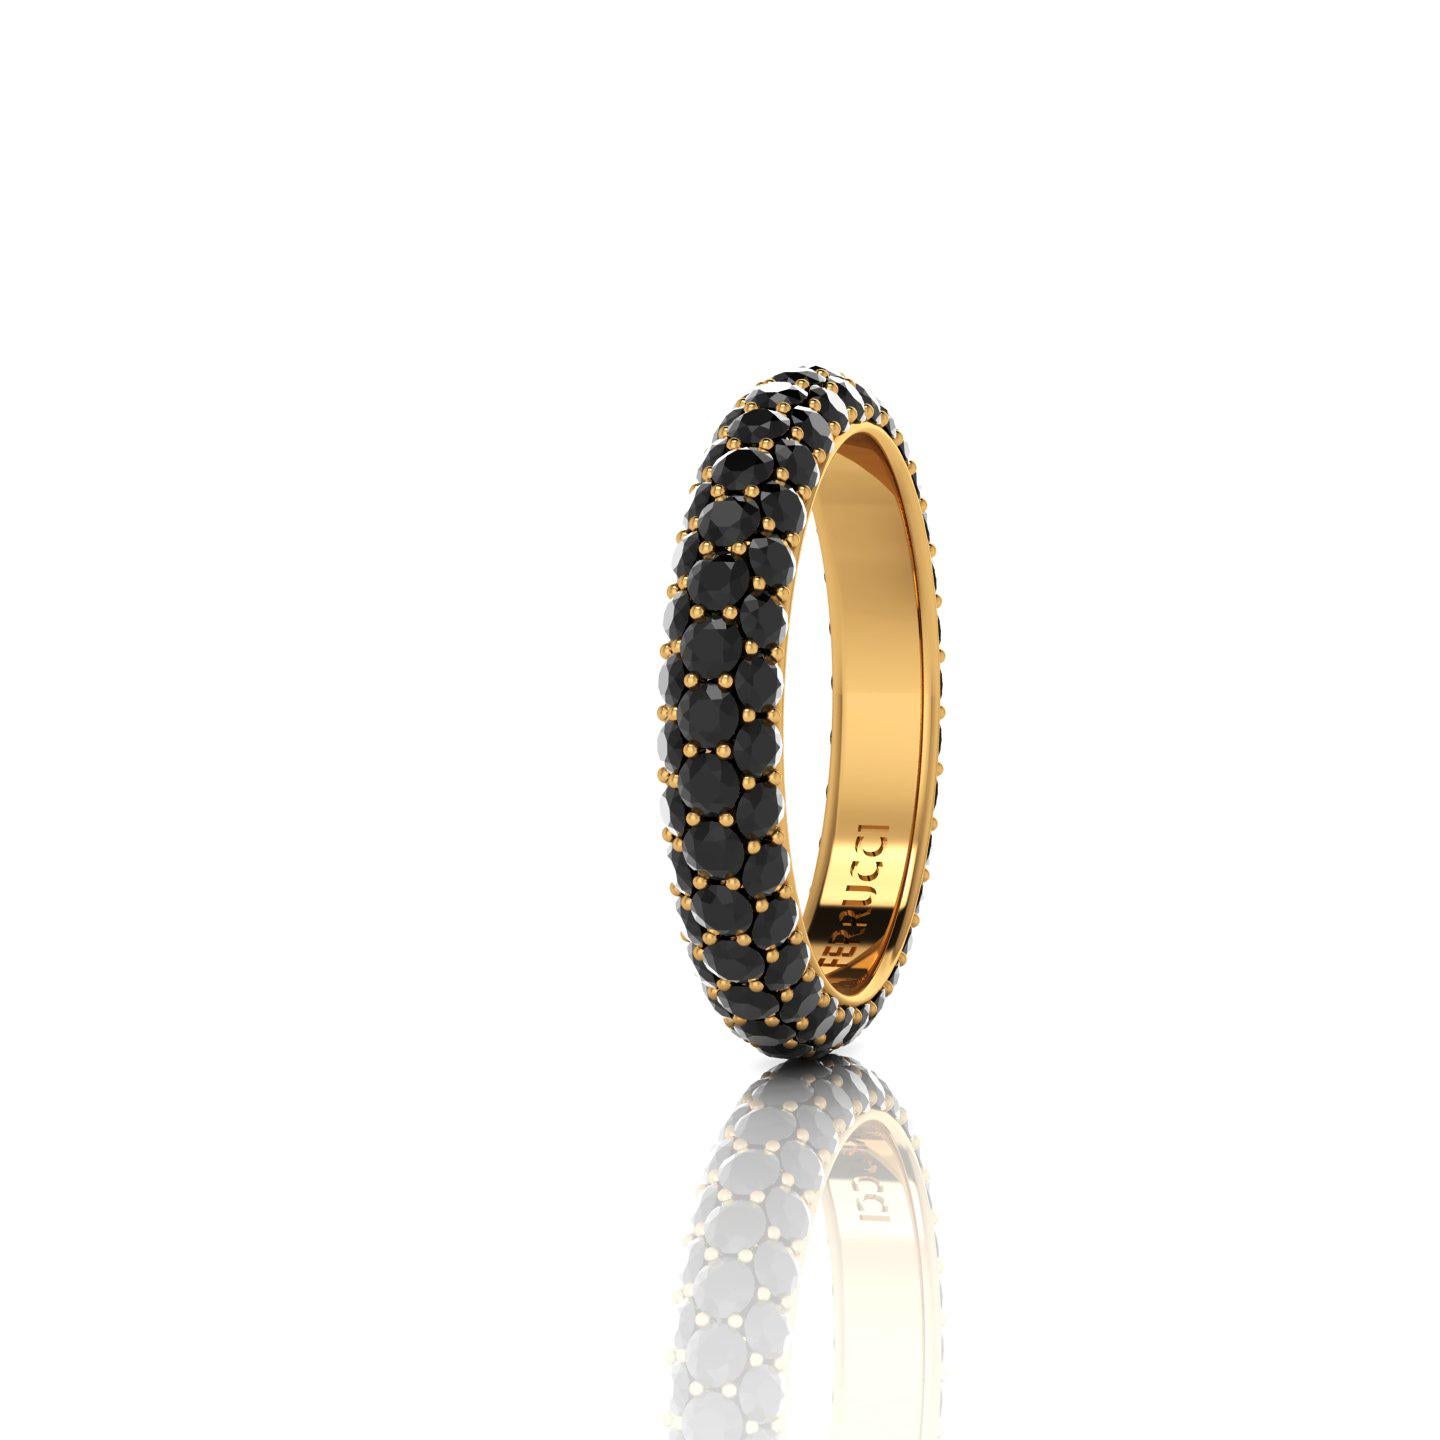 FERRUCCI diamond pave' band, a wrap of sparkling black diamonds for an approximate total carat weight of 2.00 carat, hand made in New York City with the best Italian craftsmanship, conceived in 18k yellow gold.
Classic, sophisticated, gorgeous look,